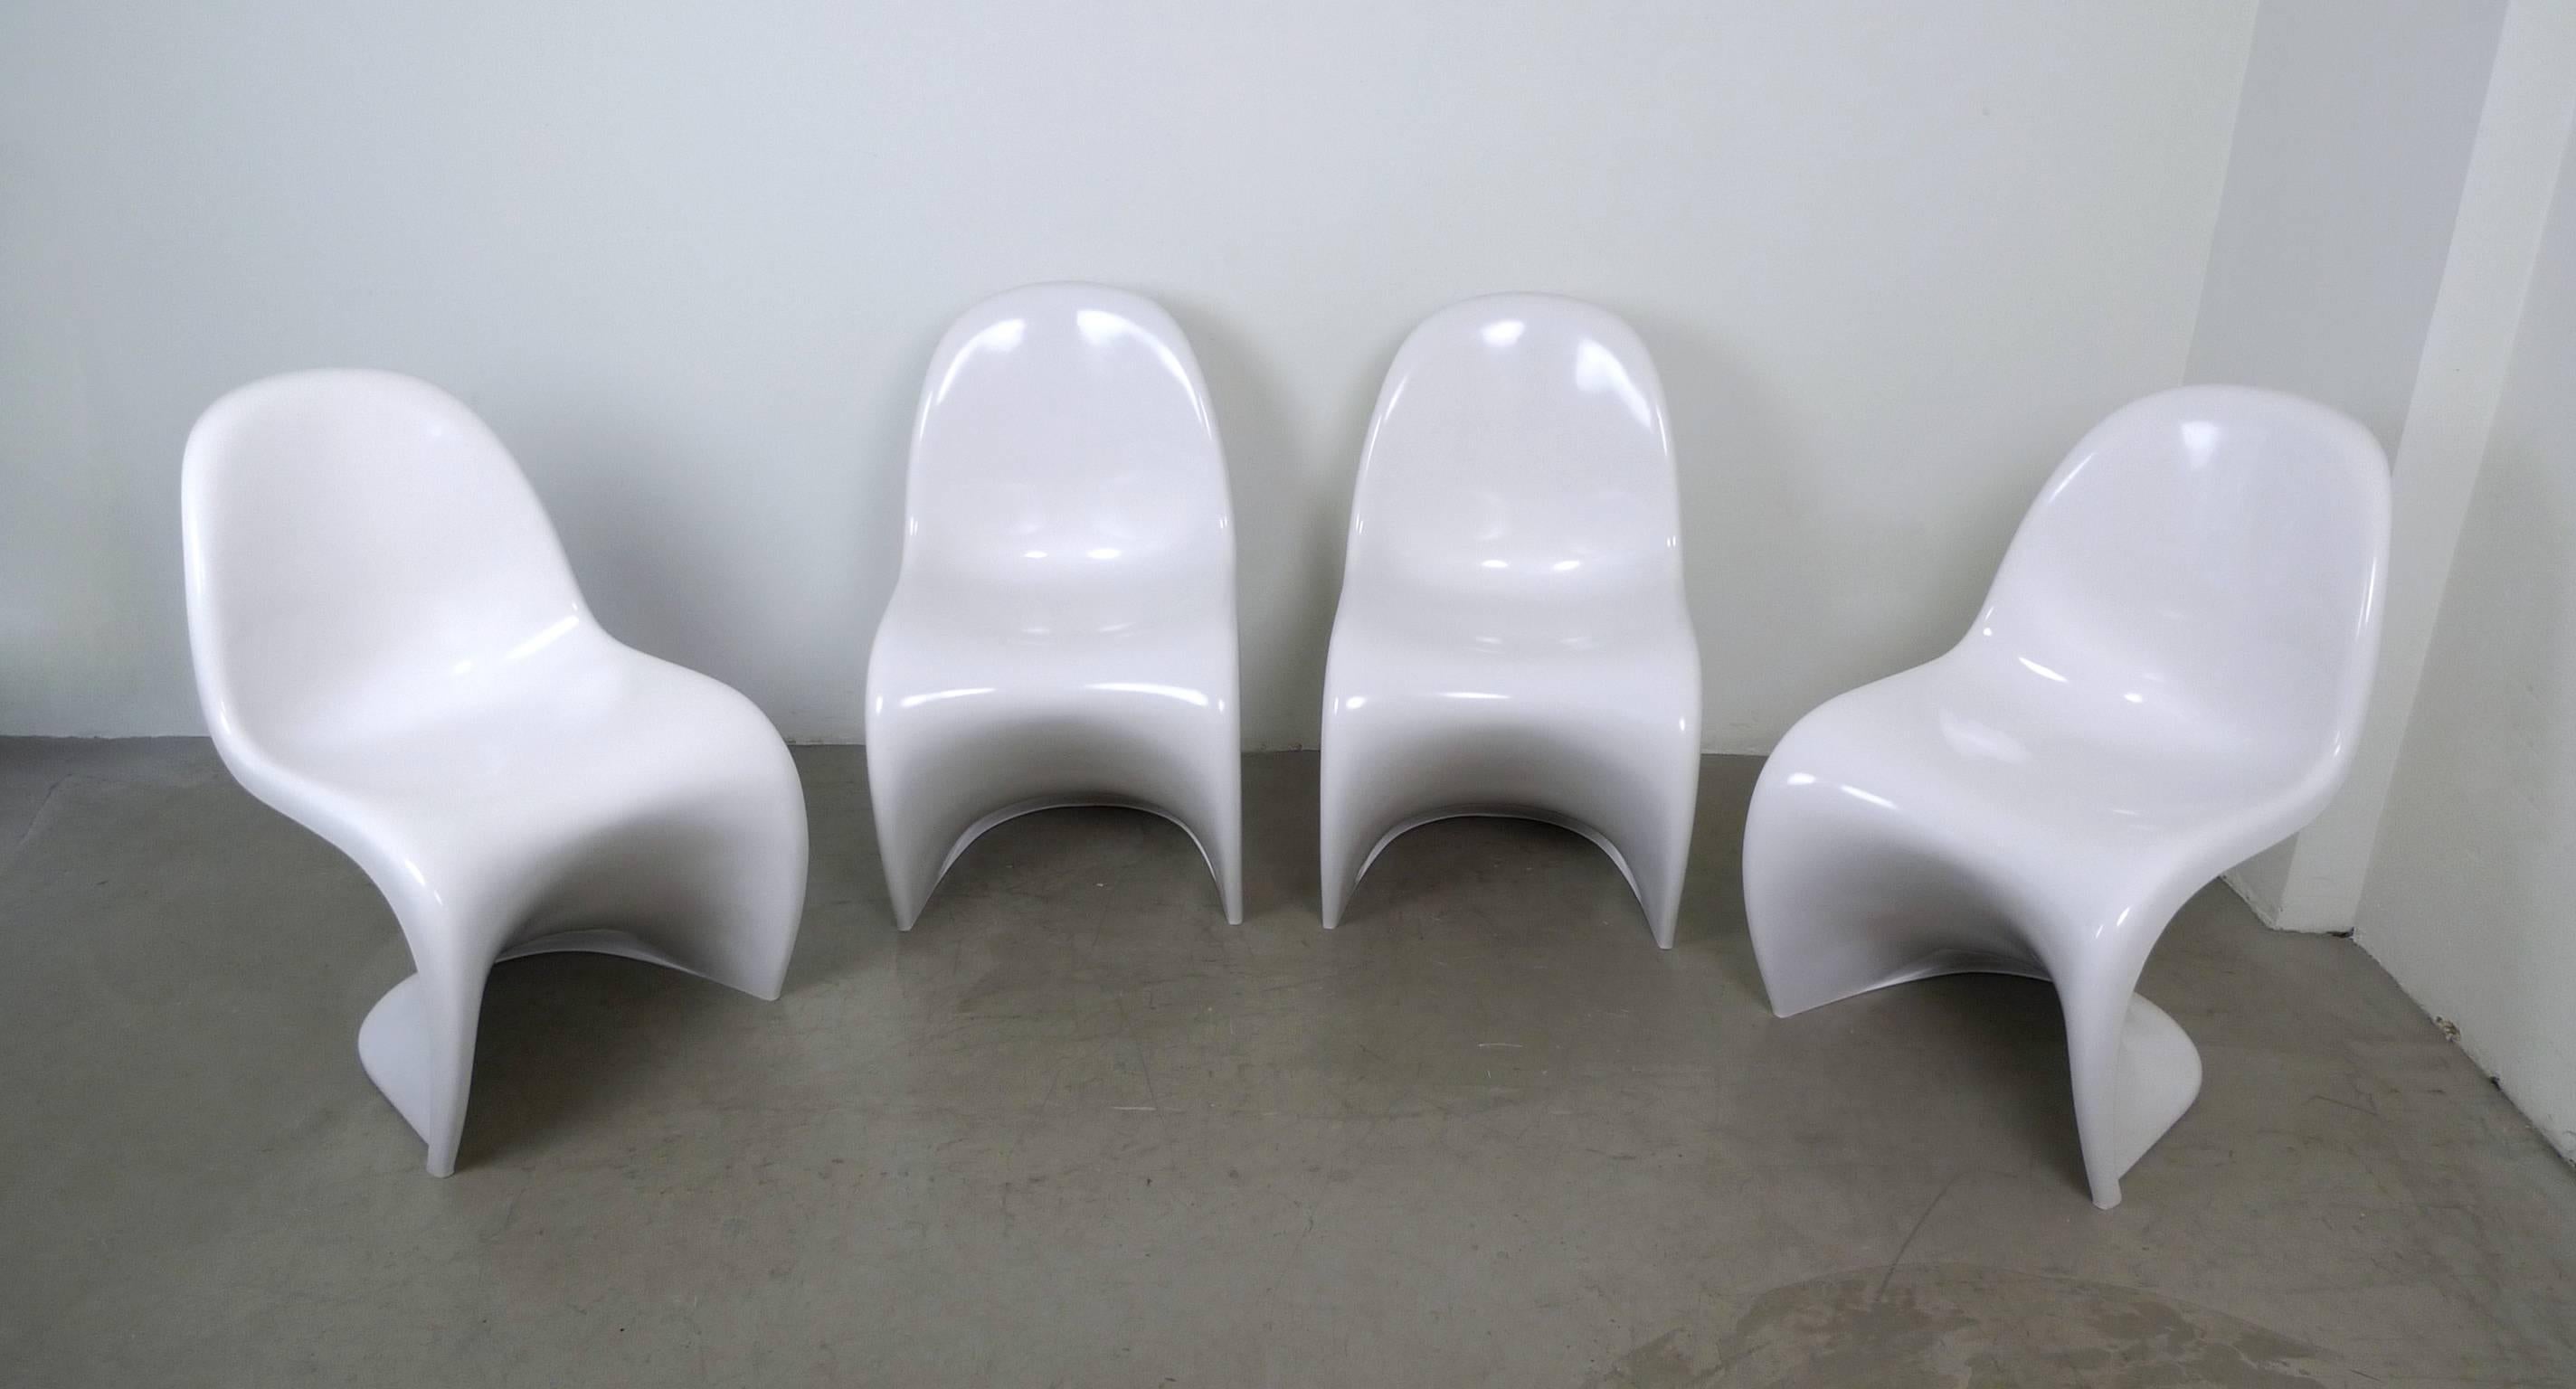 This set of four Panton chairs is made of white colored thermoplastic polystyrene and was produced in 1971 by Fehlbaum in Germany under license from Herman Miller. The set belongs to the third production series (1971-1979) and has stiffening rods